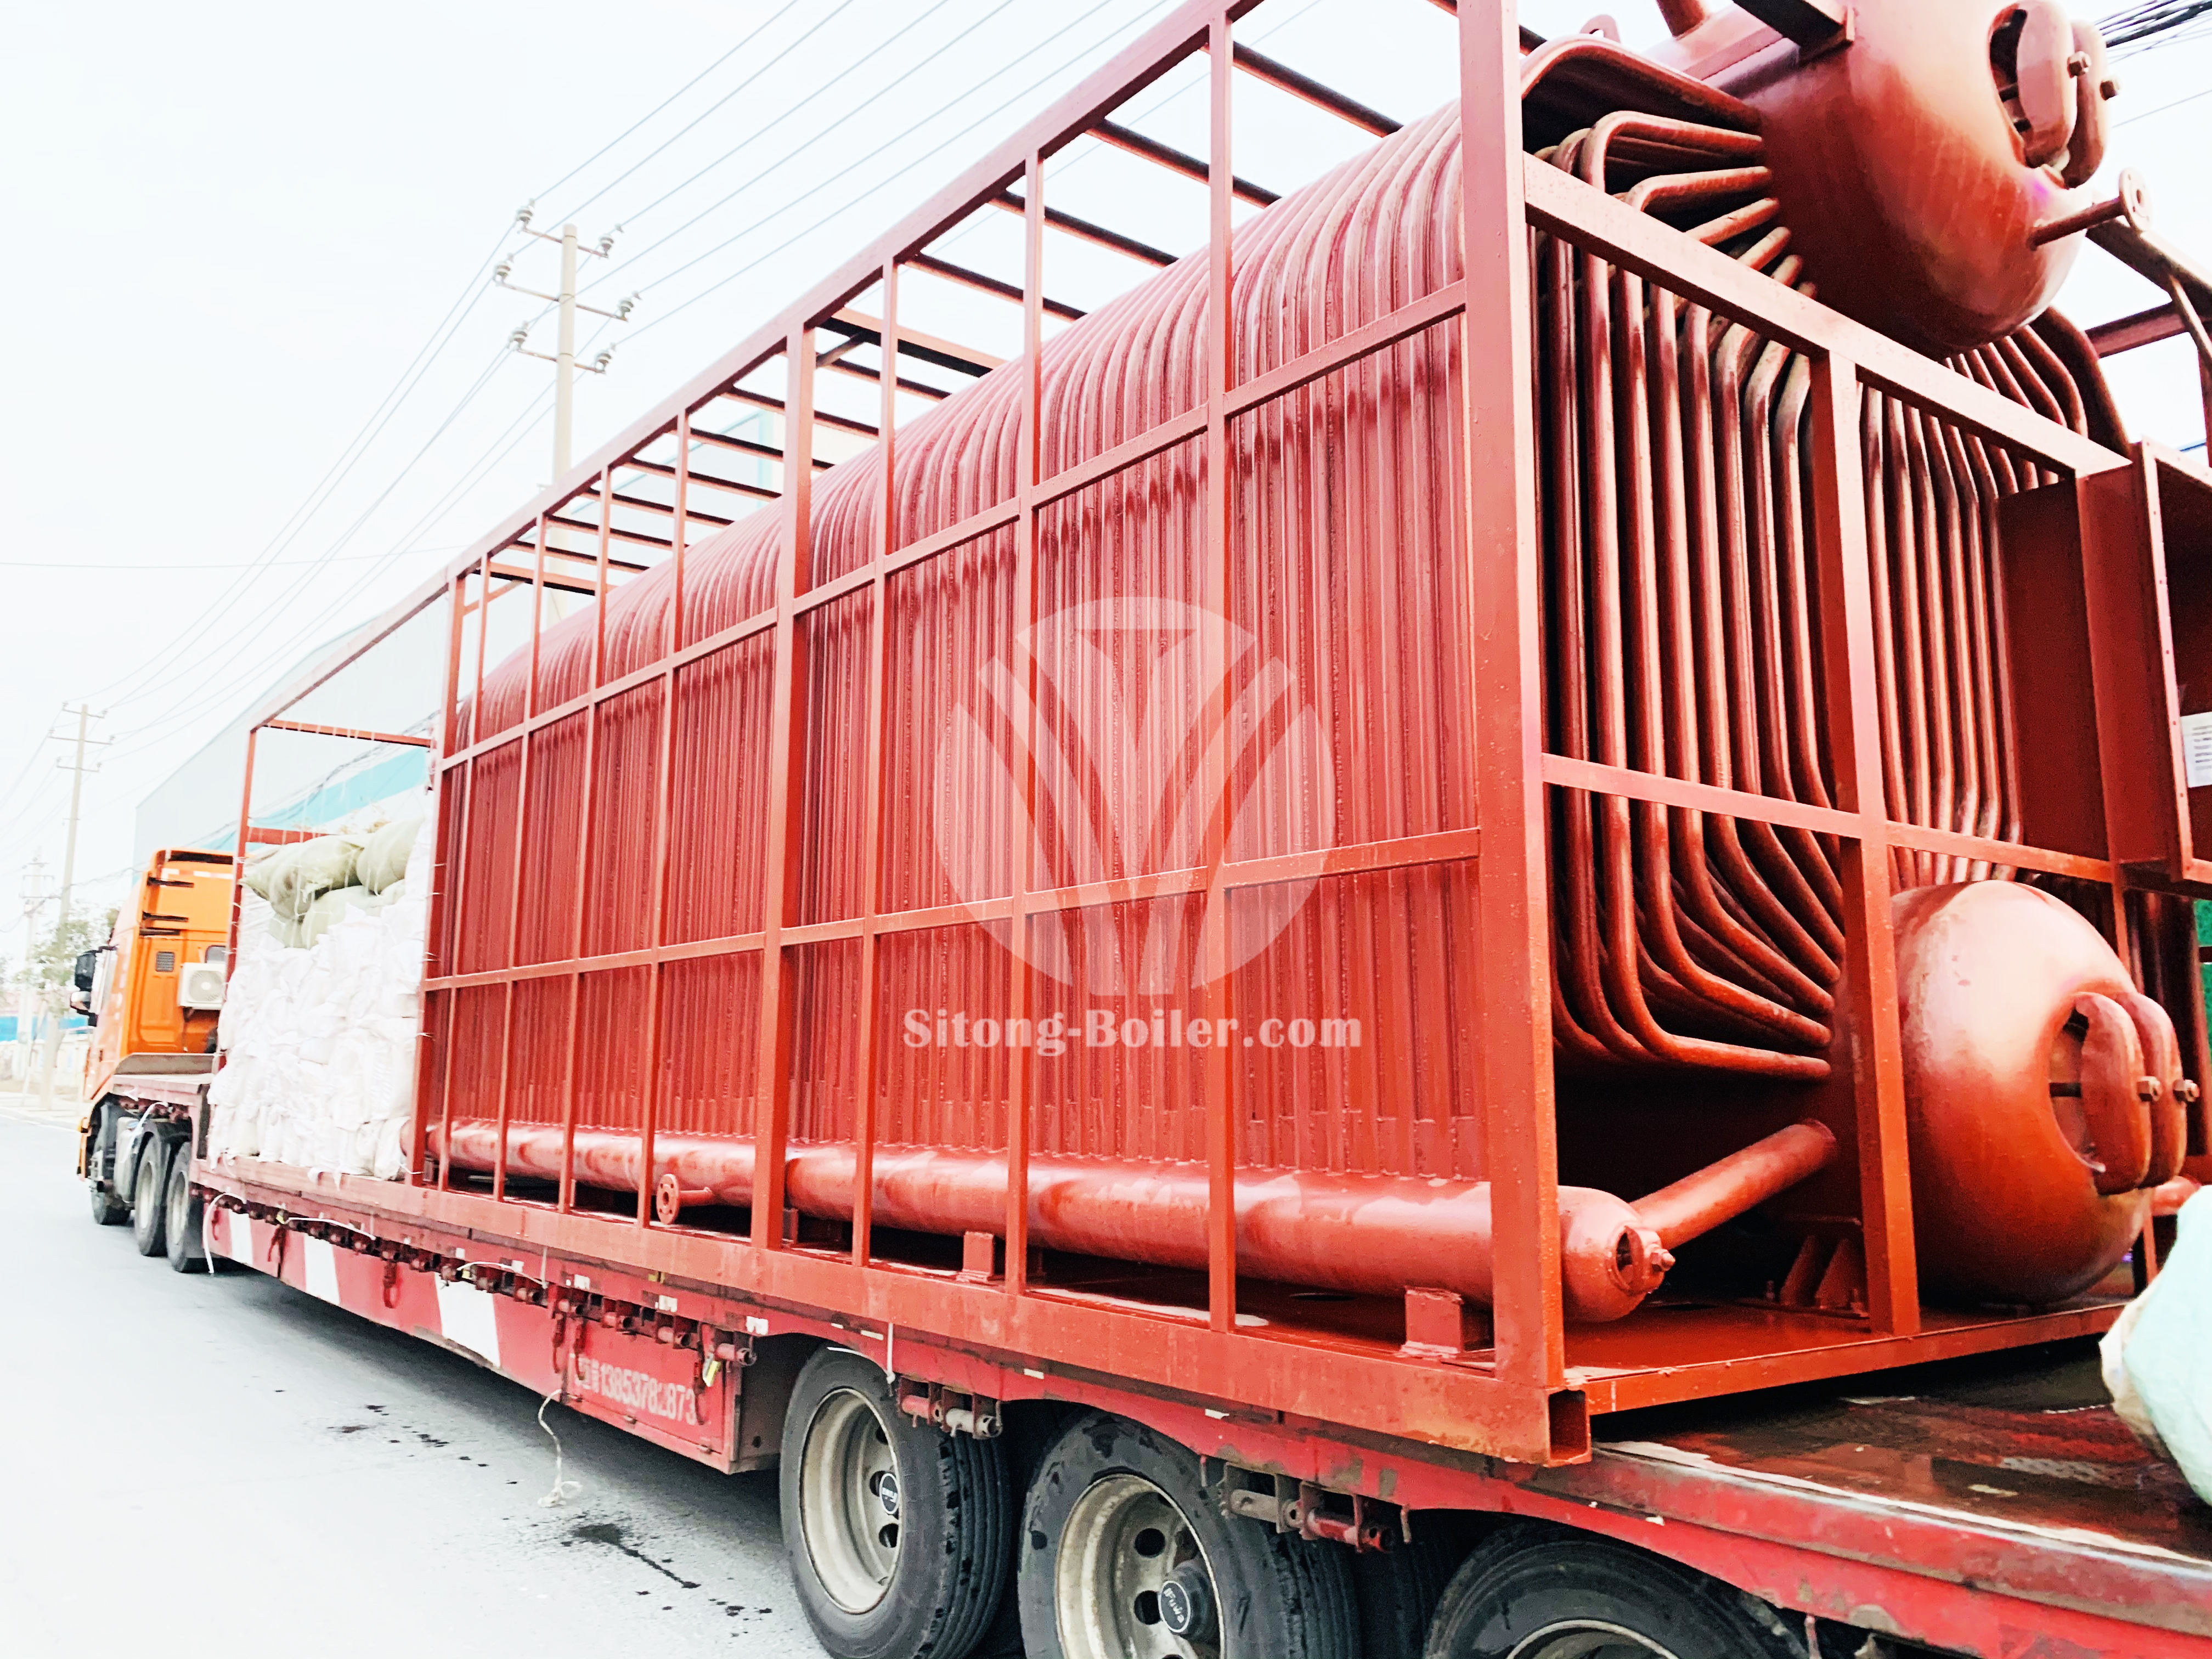 25 ton SZL Series Biomass Fired Steam Boiler for a Food Factory in the Philippines